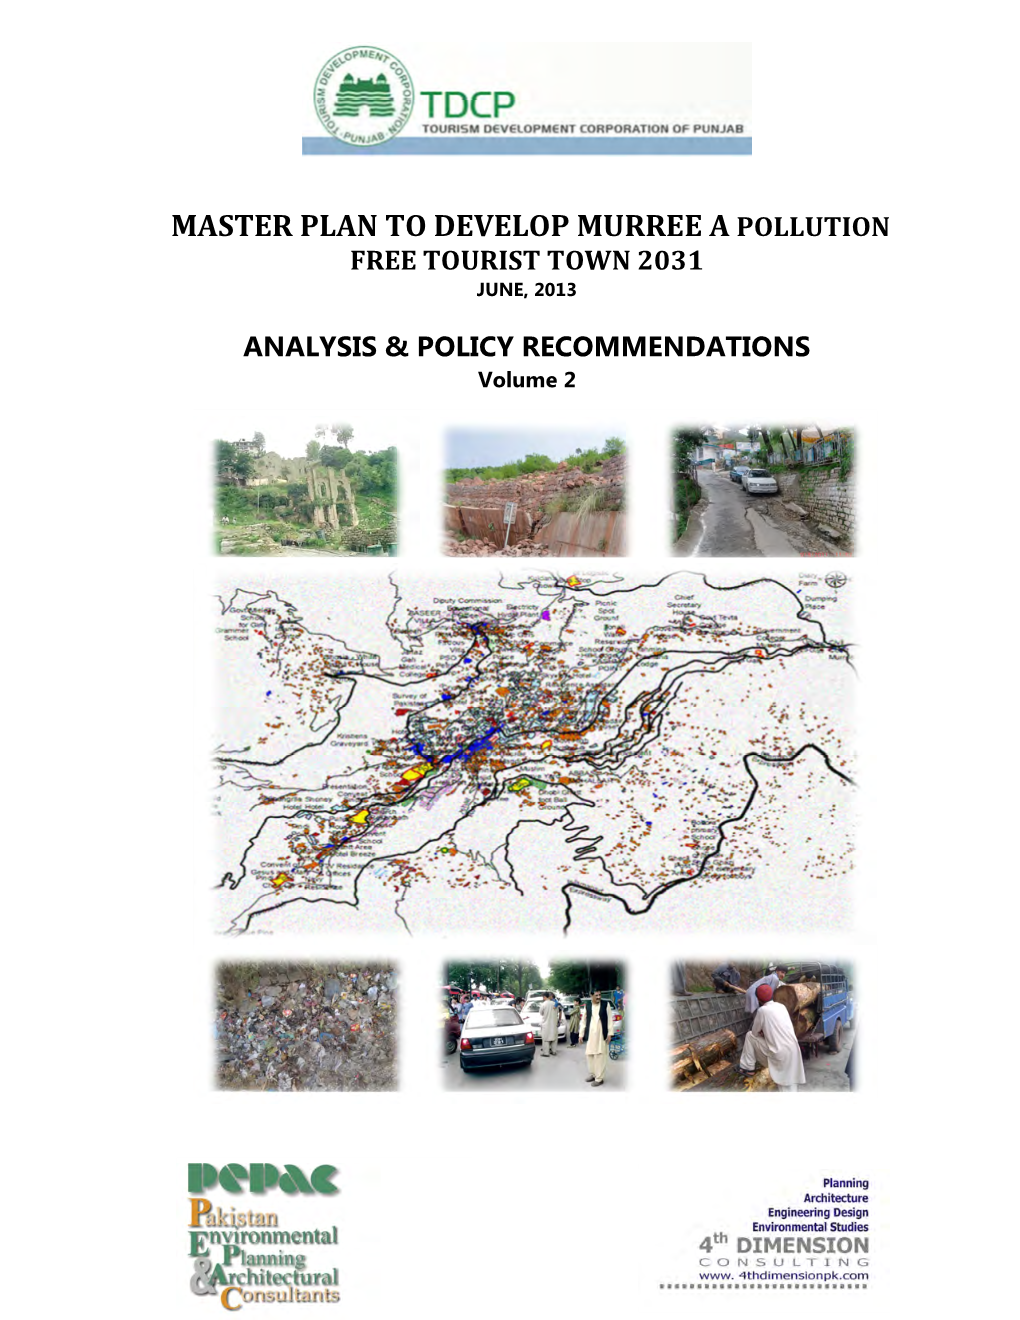 Master Plan to Develop Murree a Pollution Free Tourist Town 2031 June, 2013